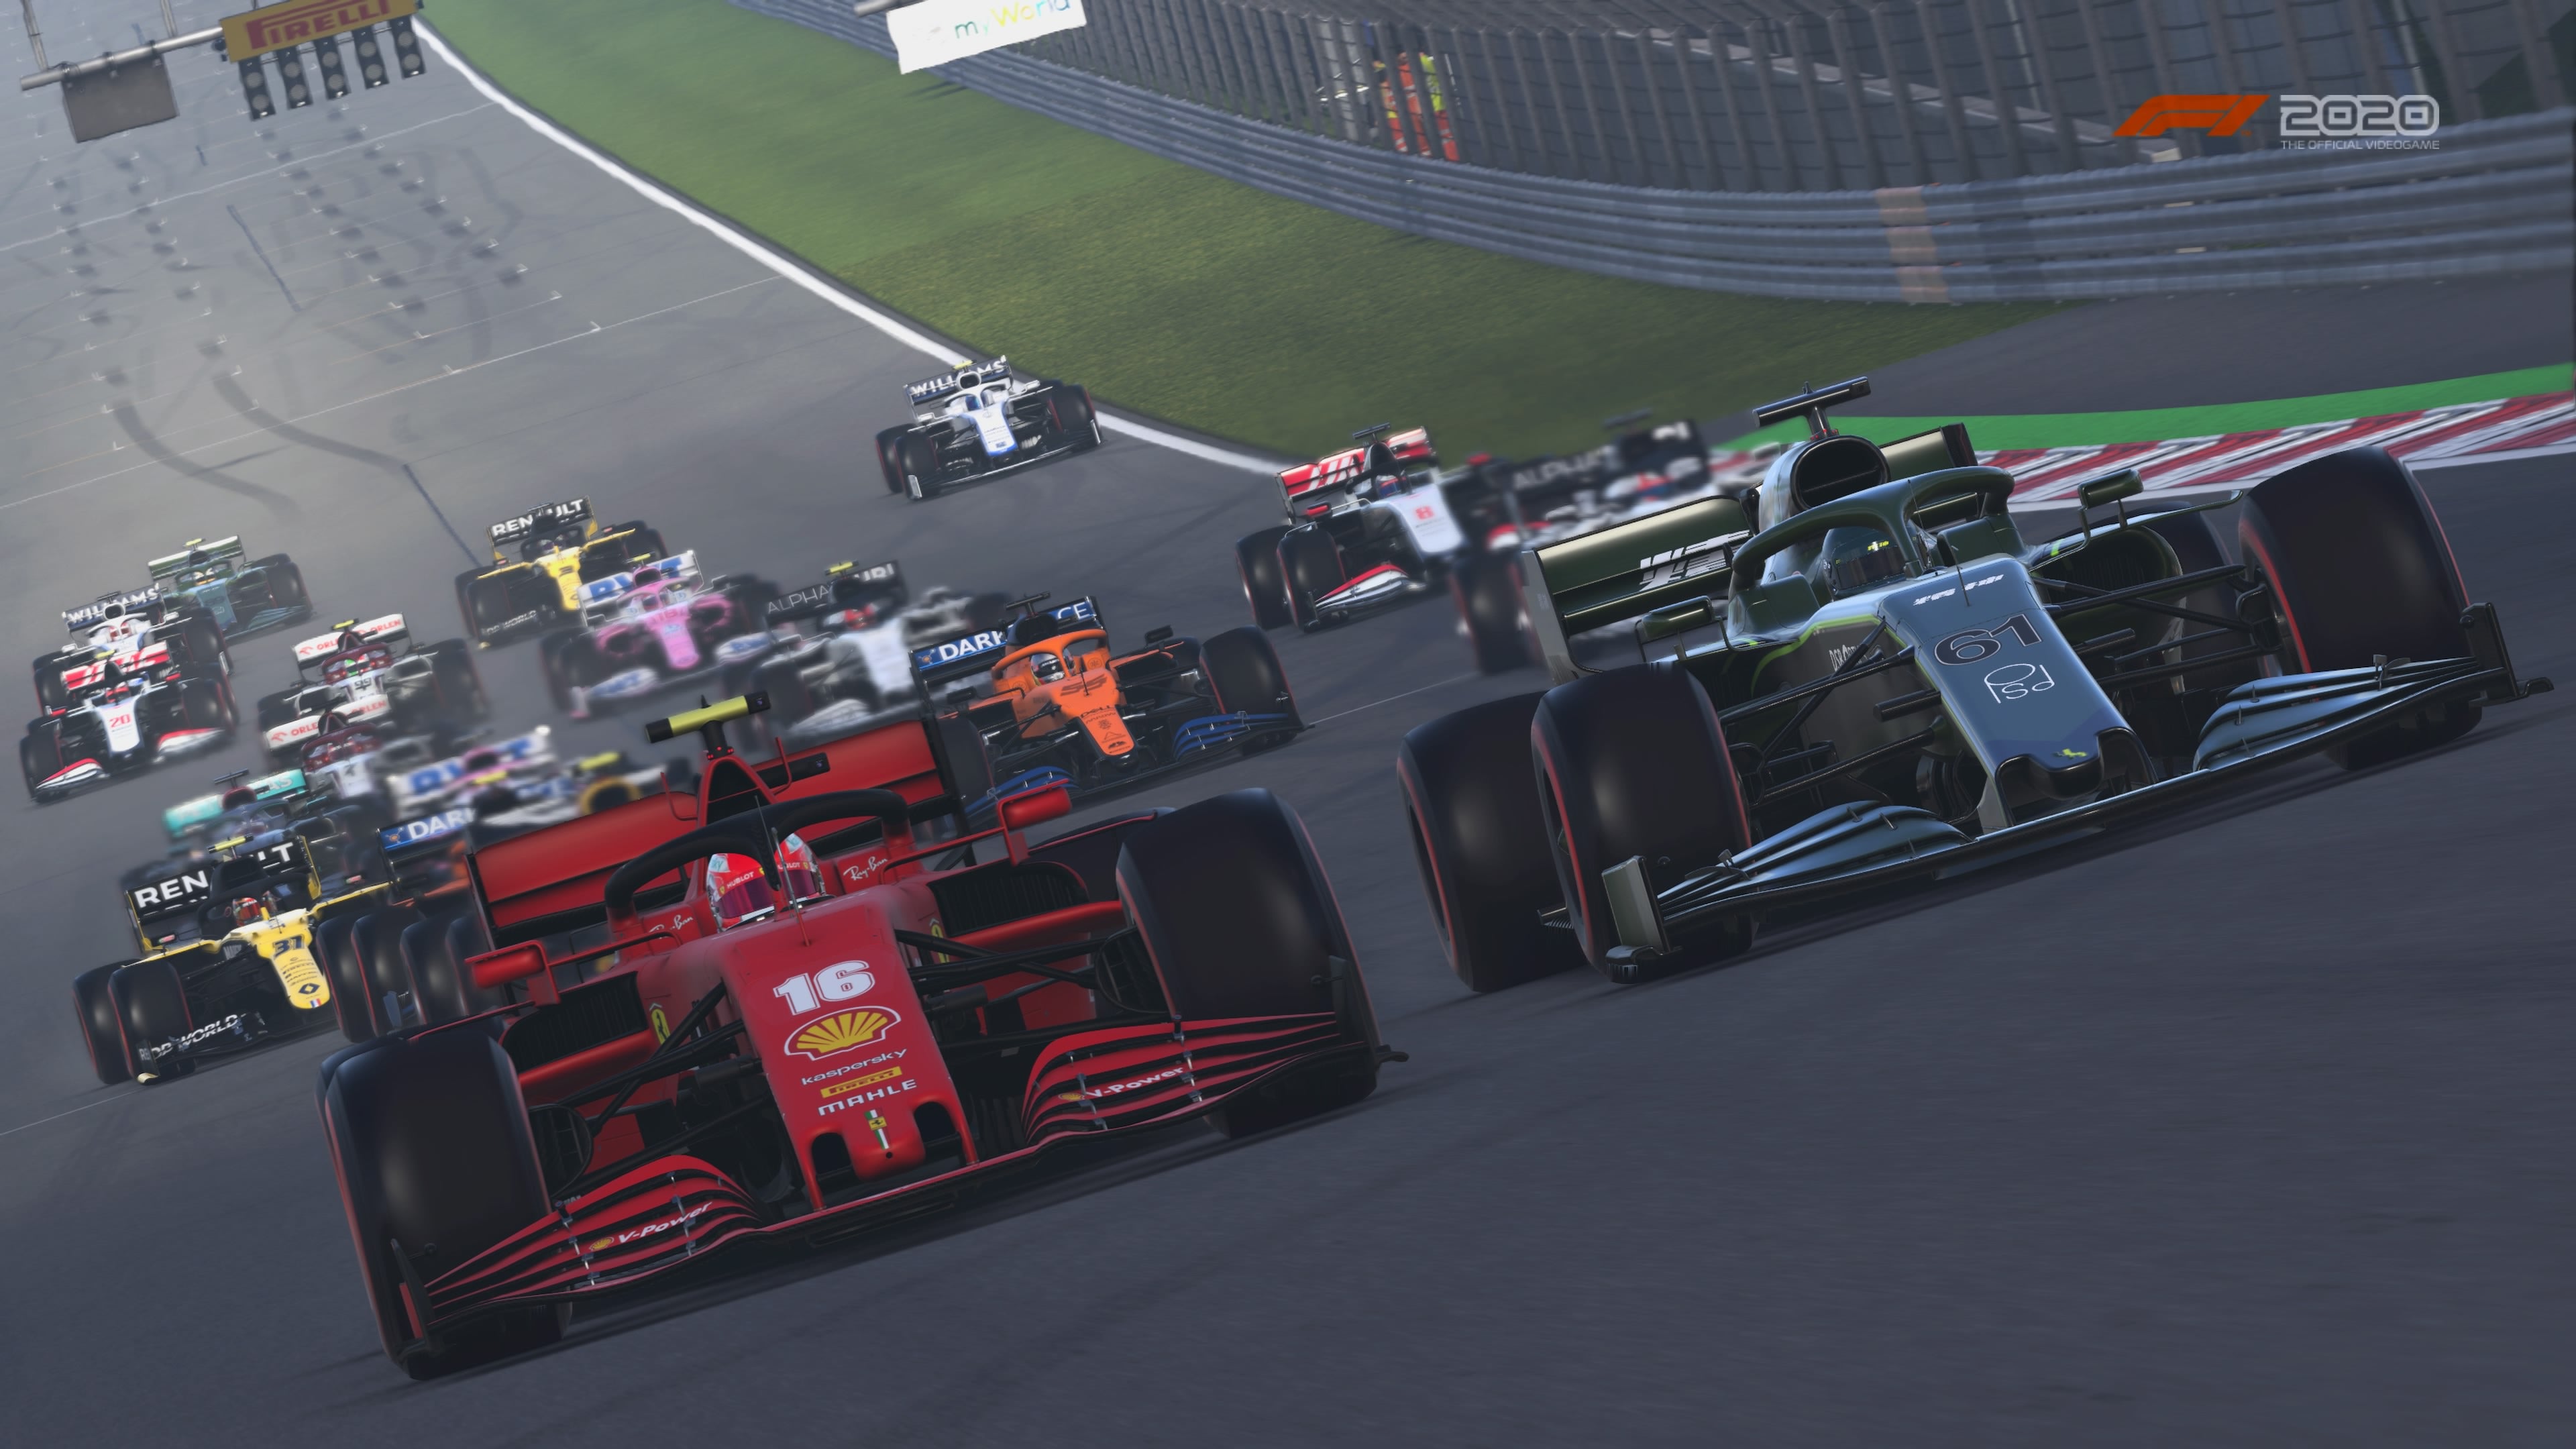 F1 2020 review